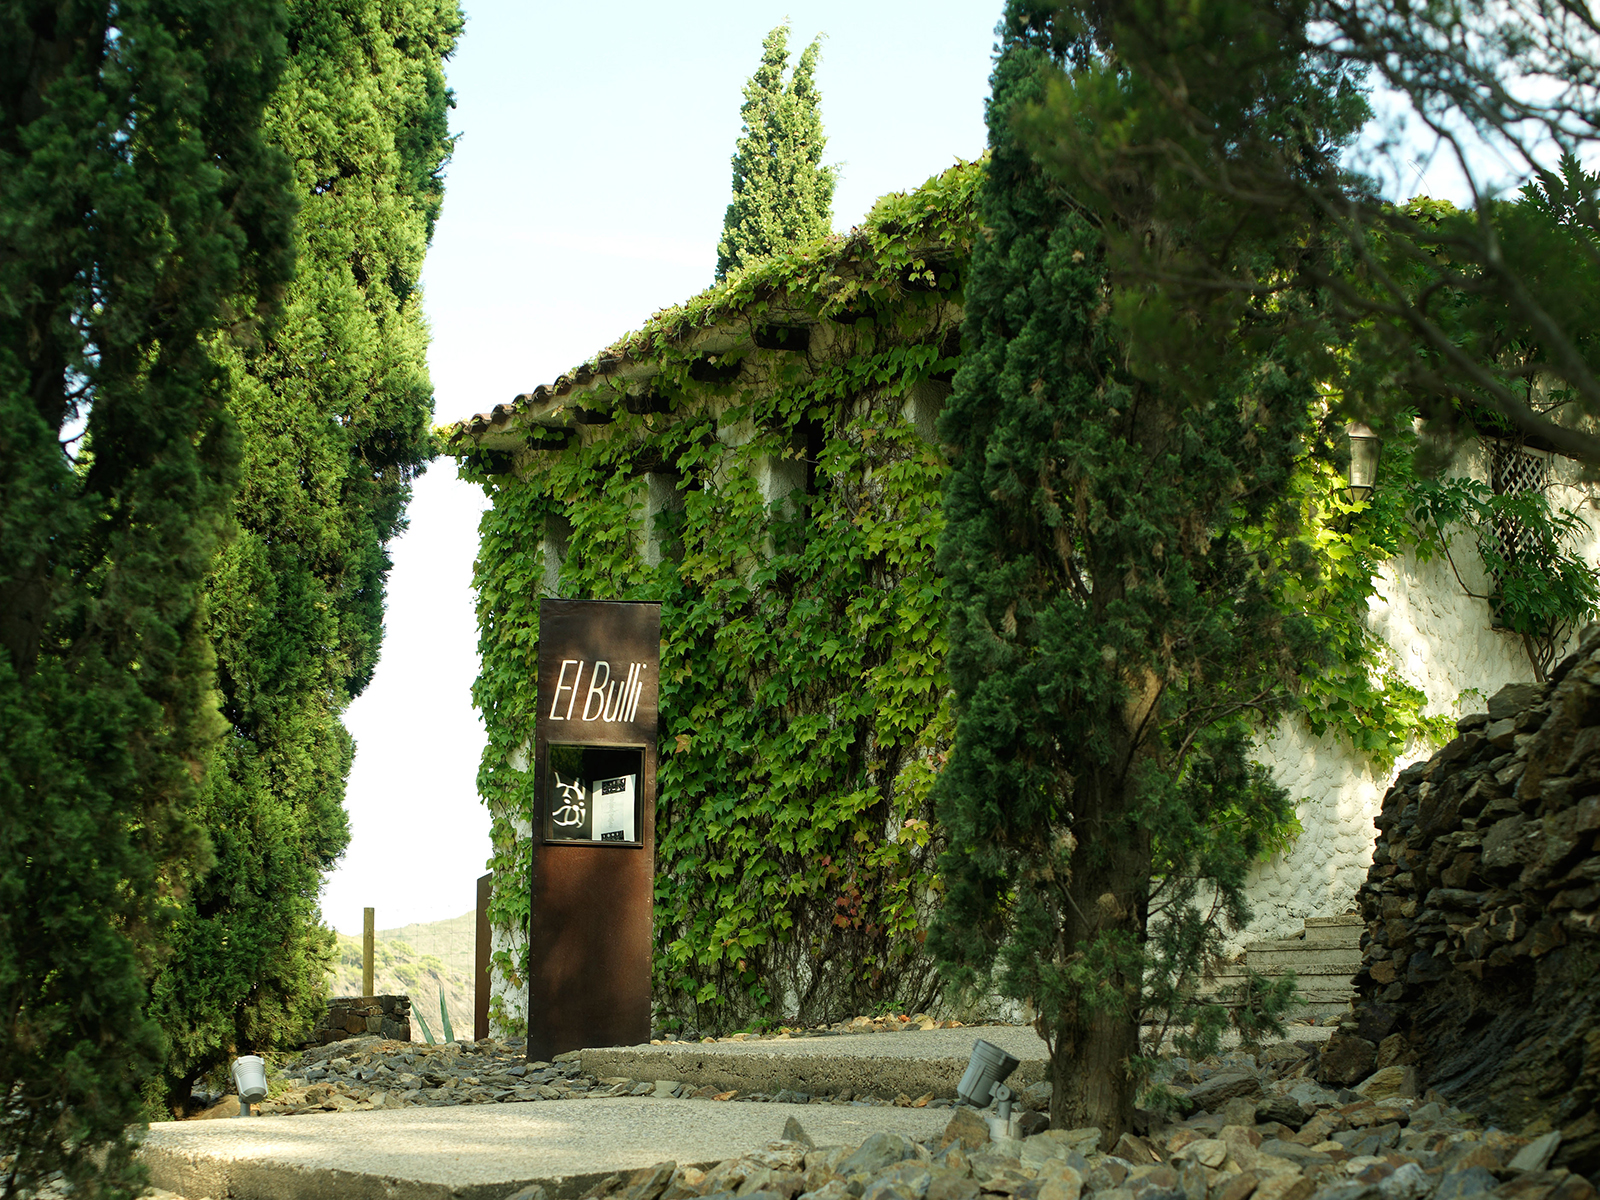 The unobtrusive entrance to El Bulli restaurant in Spain, an ivy-covered building